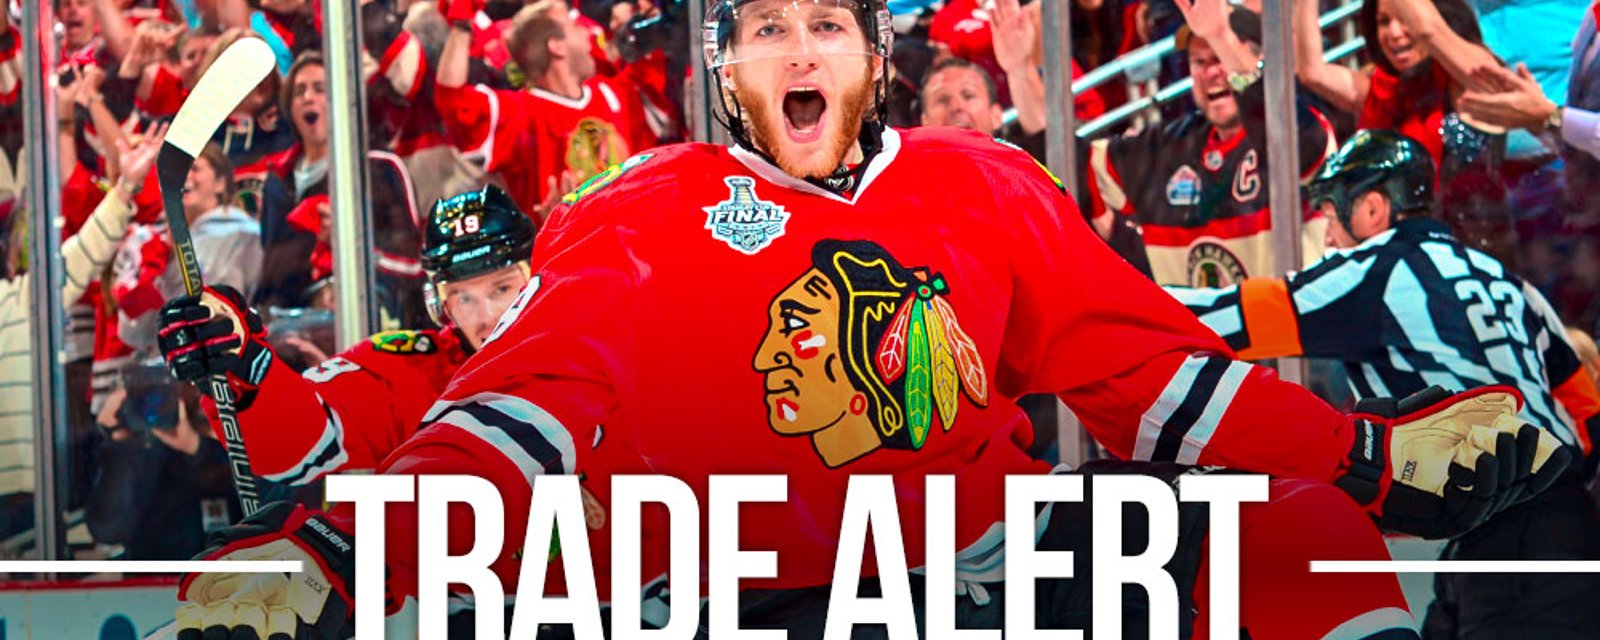 It's official, Patrick Kane has been traded to the New York Rangers